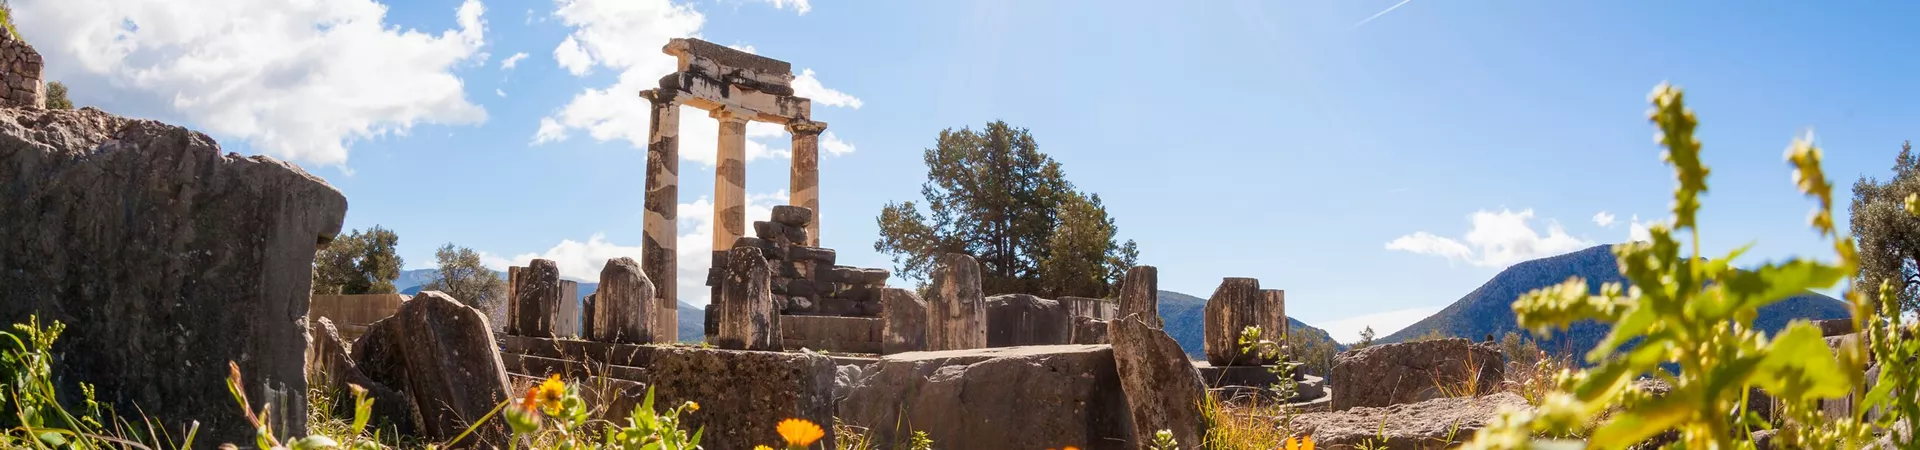 Website Banner Delphi With Ruins Of The Temple In Greece 475971724